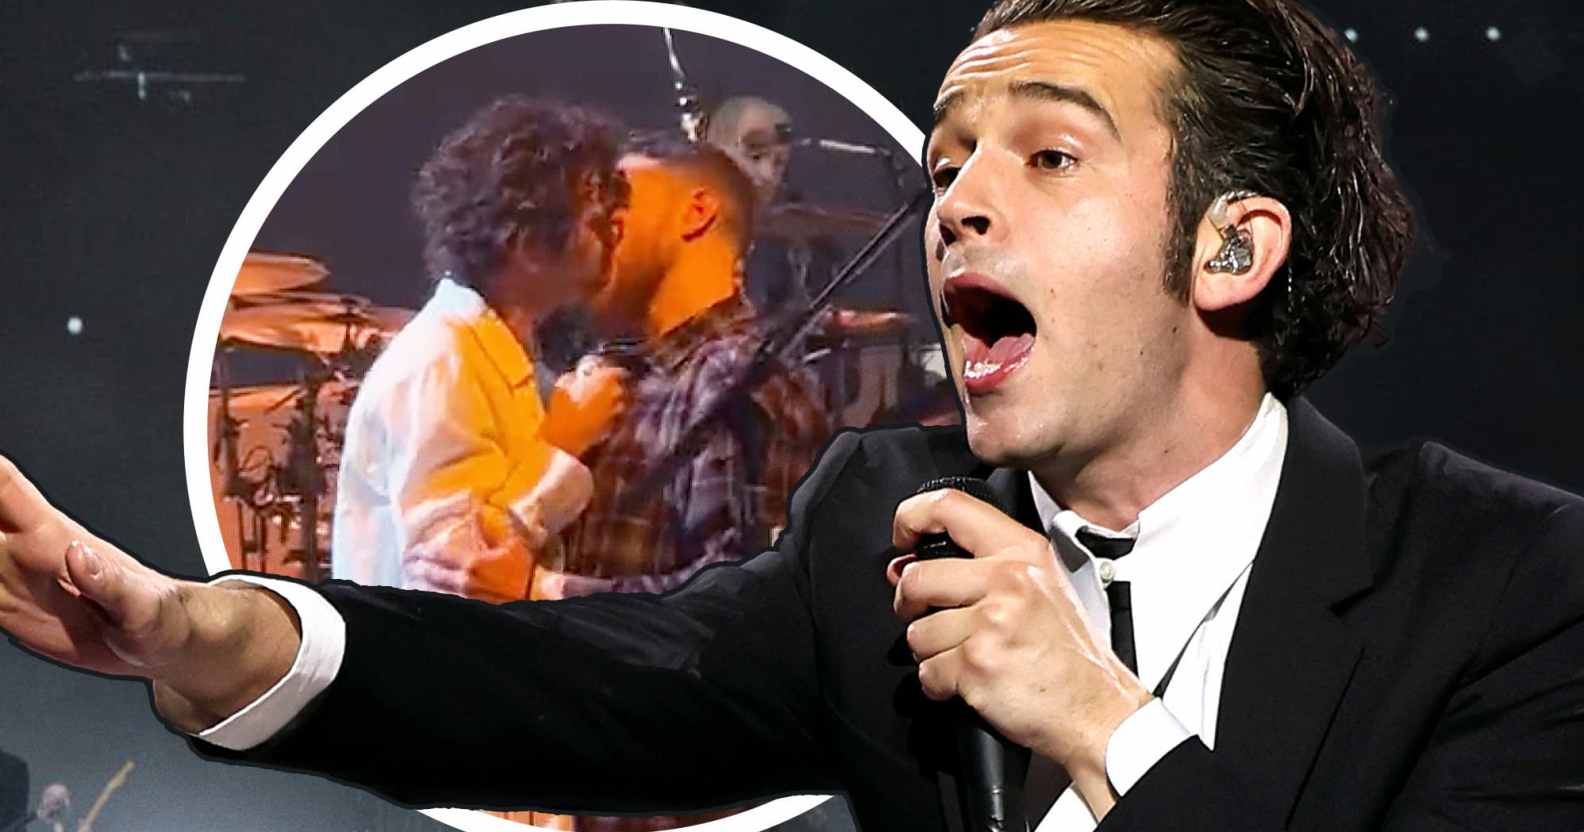 A graphic of Matty Healy performing and him kissing a male fan onstage